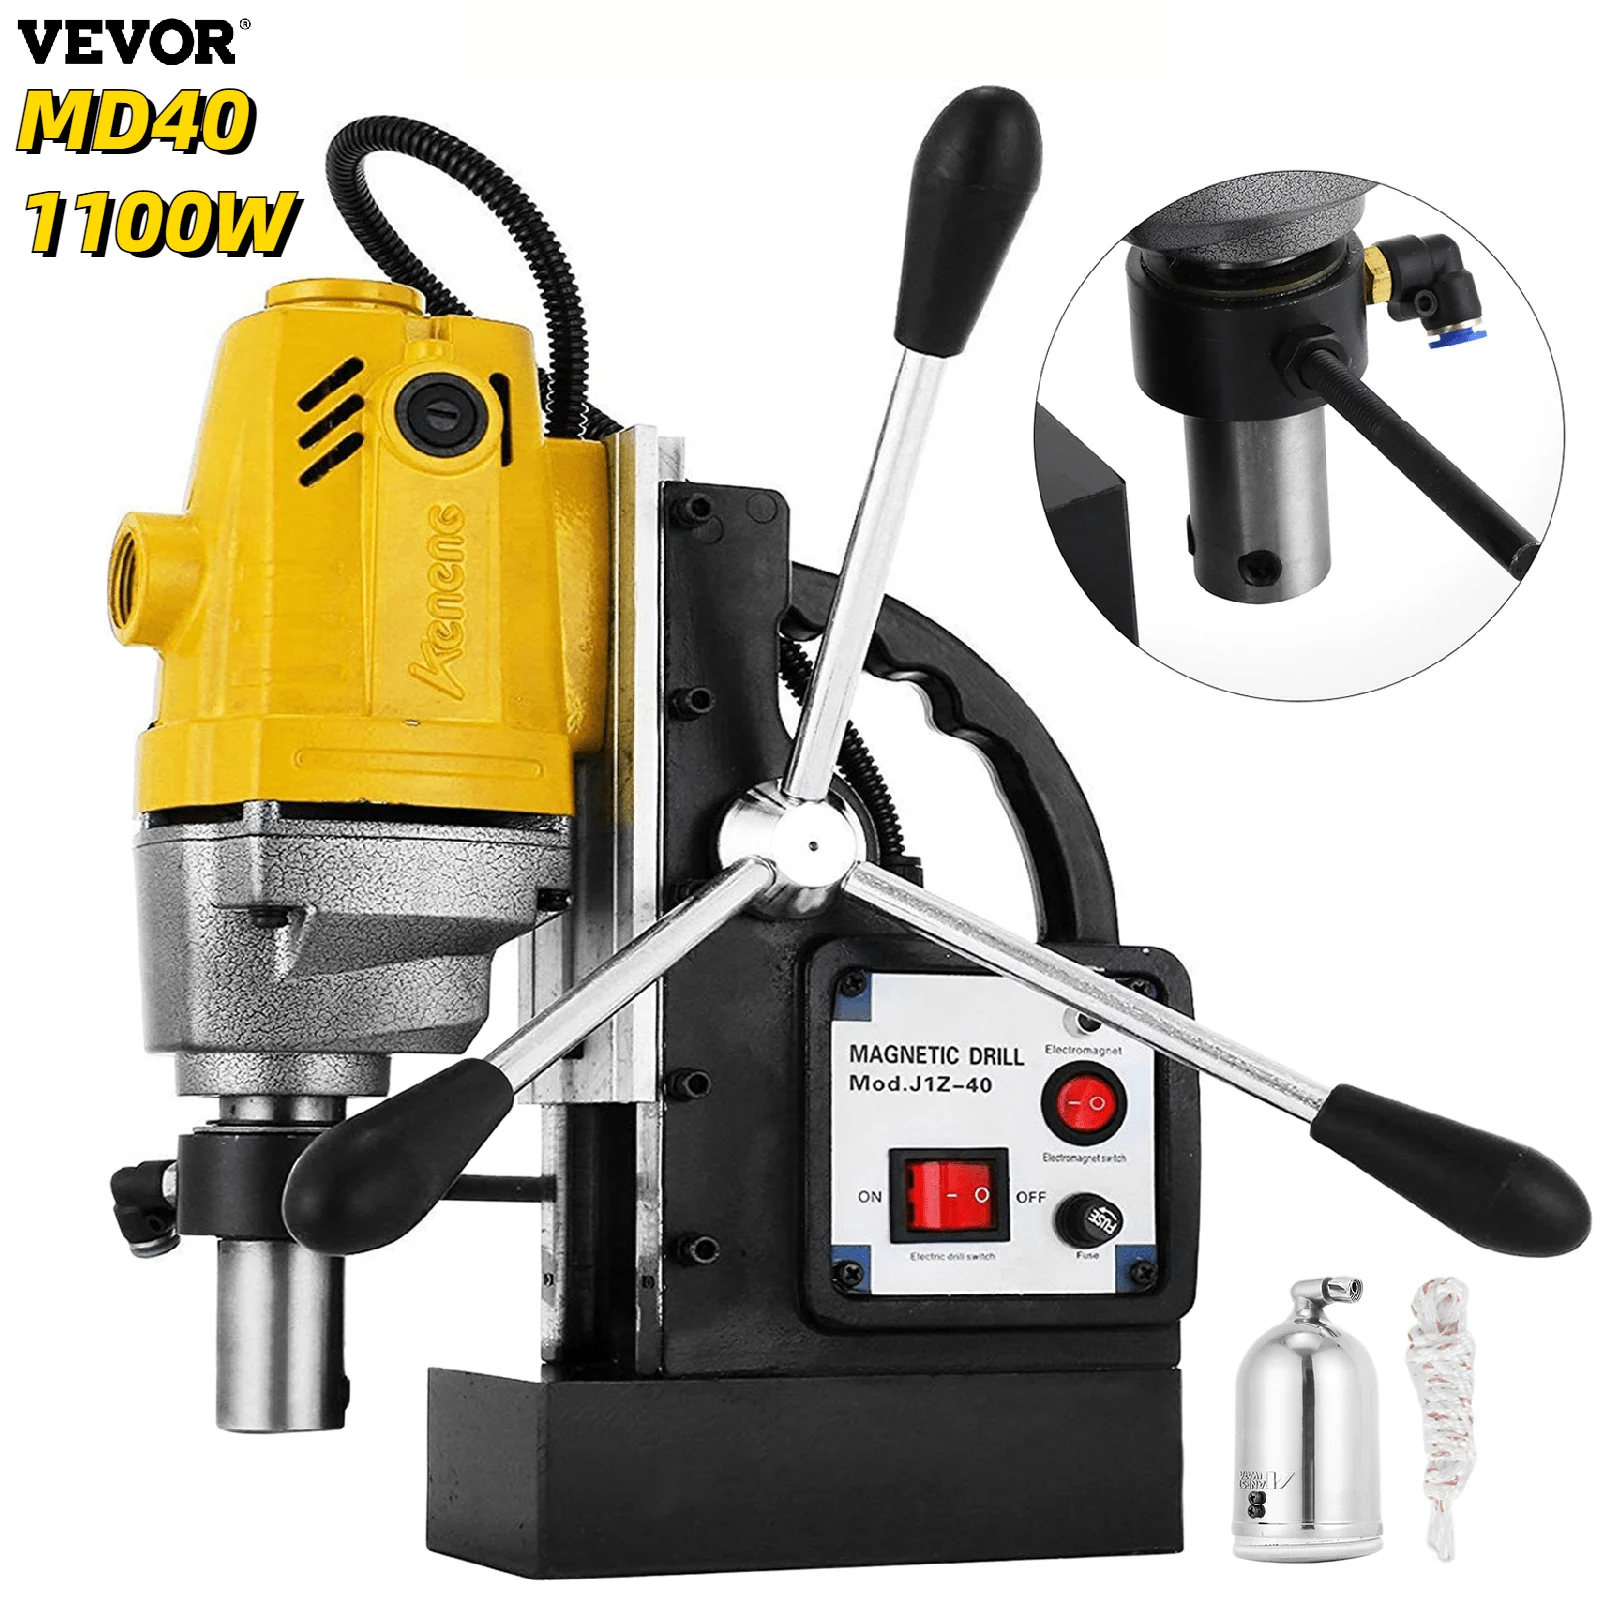 

VEVOR MD40 40mm Magnetic Drill Press 1100W Height Adjustable Electric Bench Drilling Rig Machine for Engineering Steel Structure